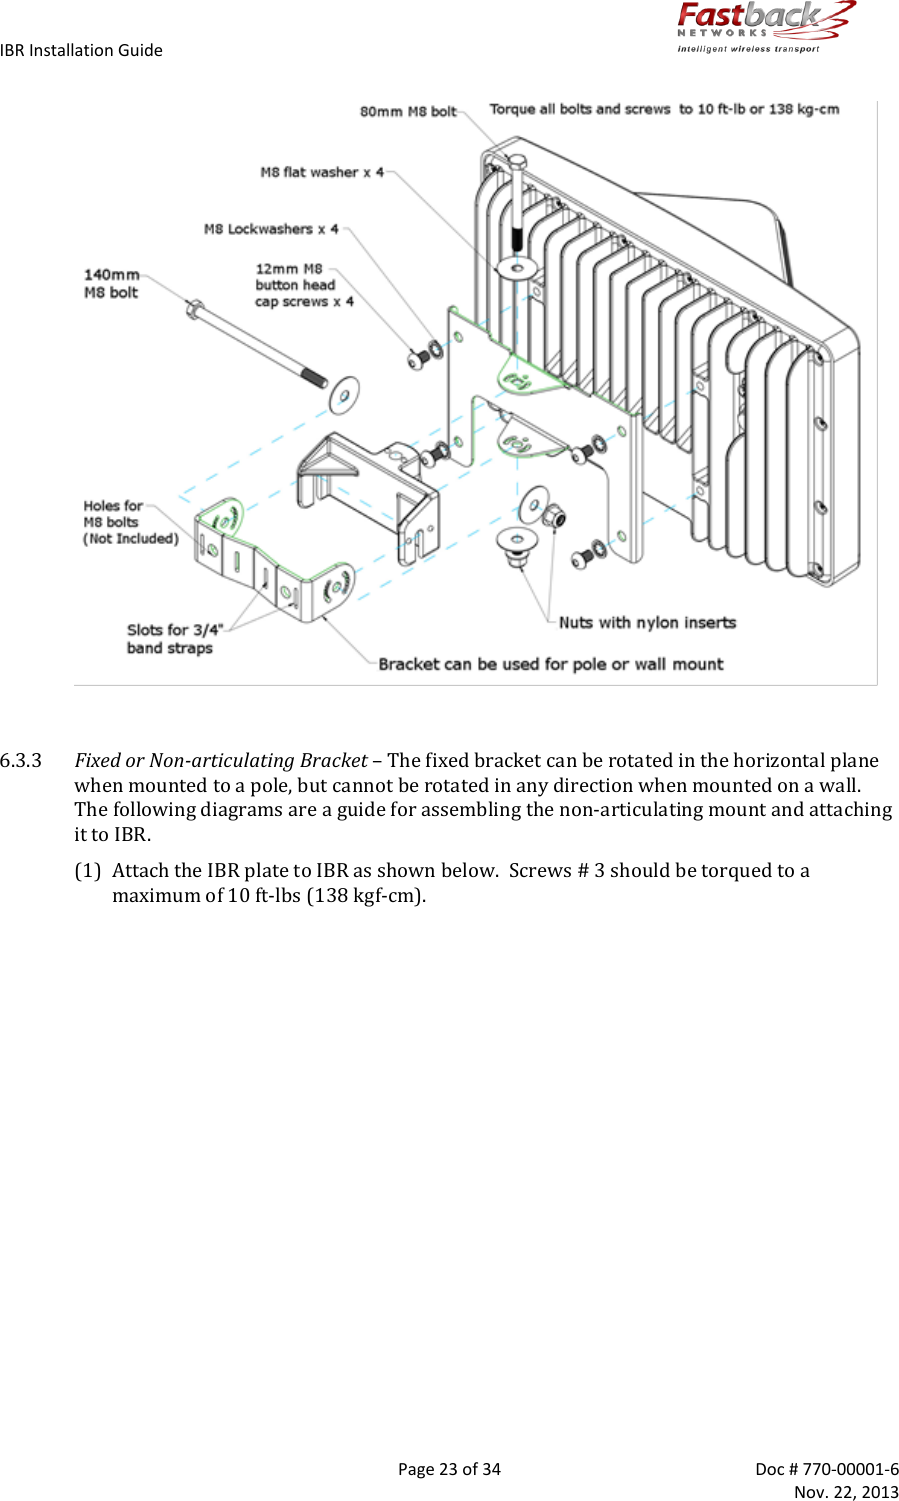 IBR Installation Guide        Page 23 of 34  Doc # 770-00001-6     Nov. 22, 2013     6.3.3 Fixed or Non-articulating Bracket – The fixed bracket can be rotated in the horizontal plane when mounted to a pole, but cannot be rotated in any direction when mounted on a wall.  The following diagrams are a guide for assembling the non-articulating mount and attaching it to IBR. (1) Attach the IBR plate to IBR as shown below.  Screws # 3 should be torqued to a maximum of 10 ft-lbs (138 kgf-cm).  